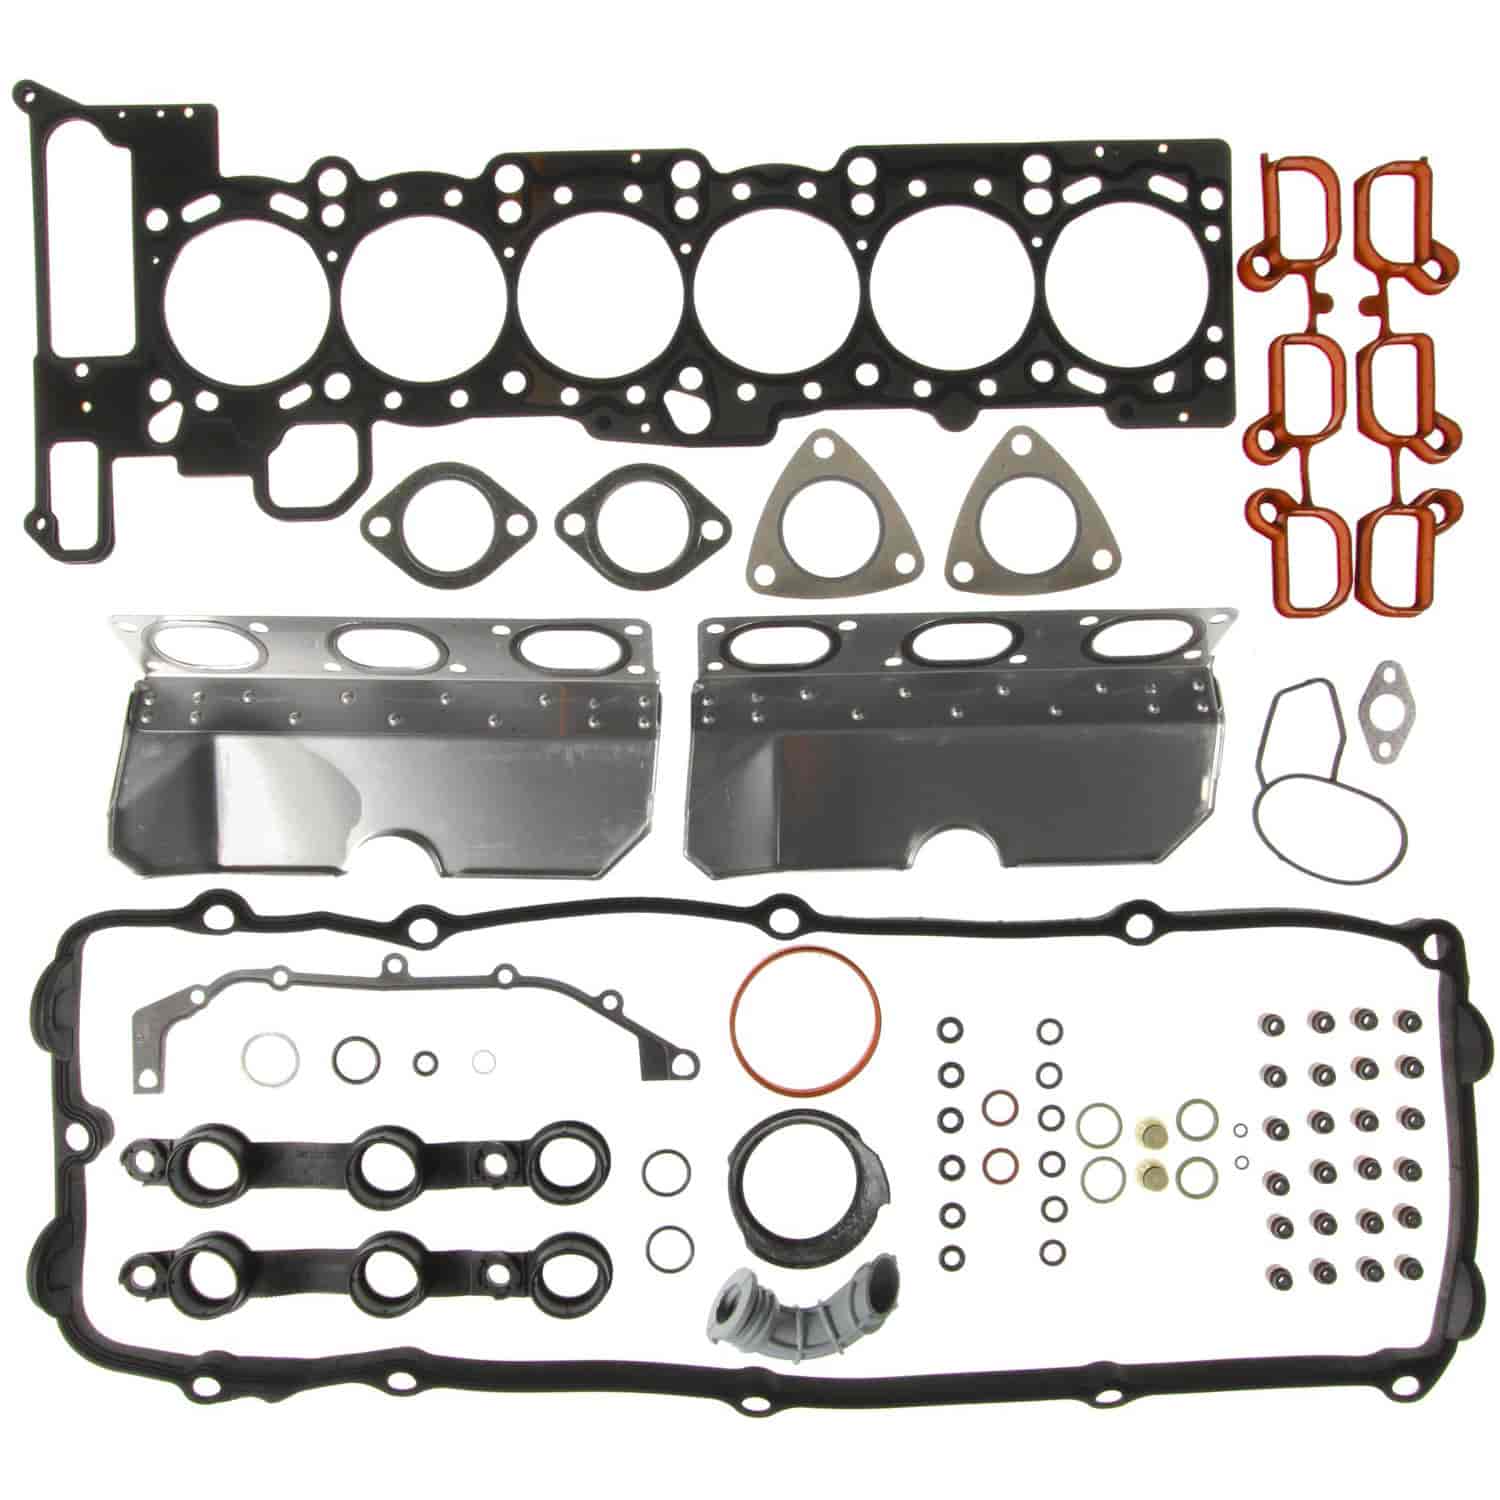 Cylinder Head Set BMW 3 AND 5 SERIES 1998-2002 2.5L and 2.8L